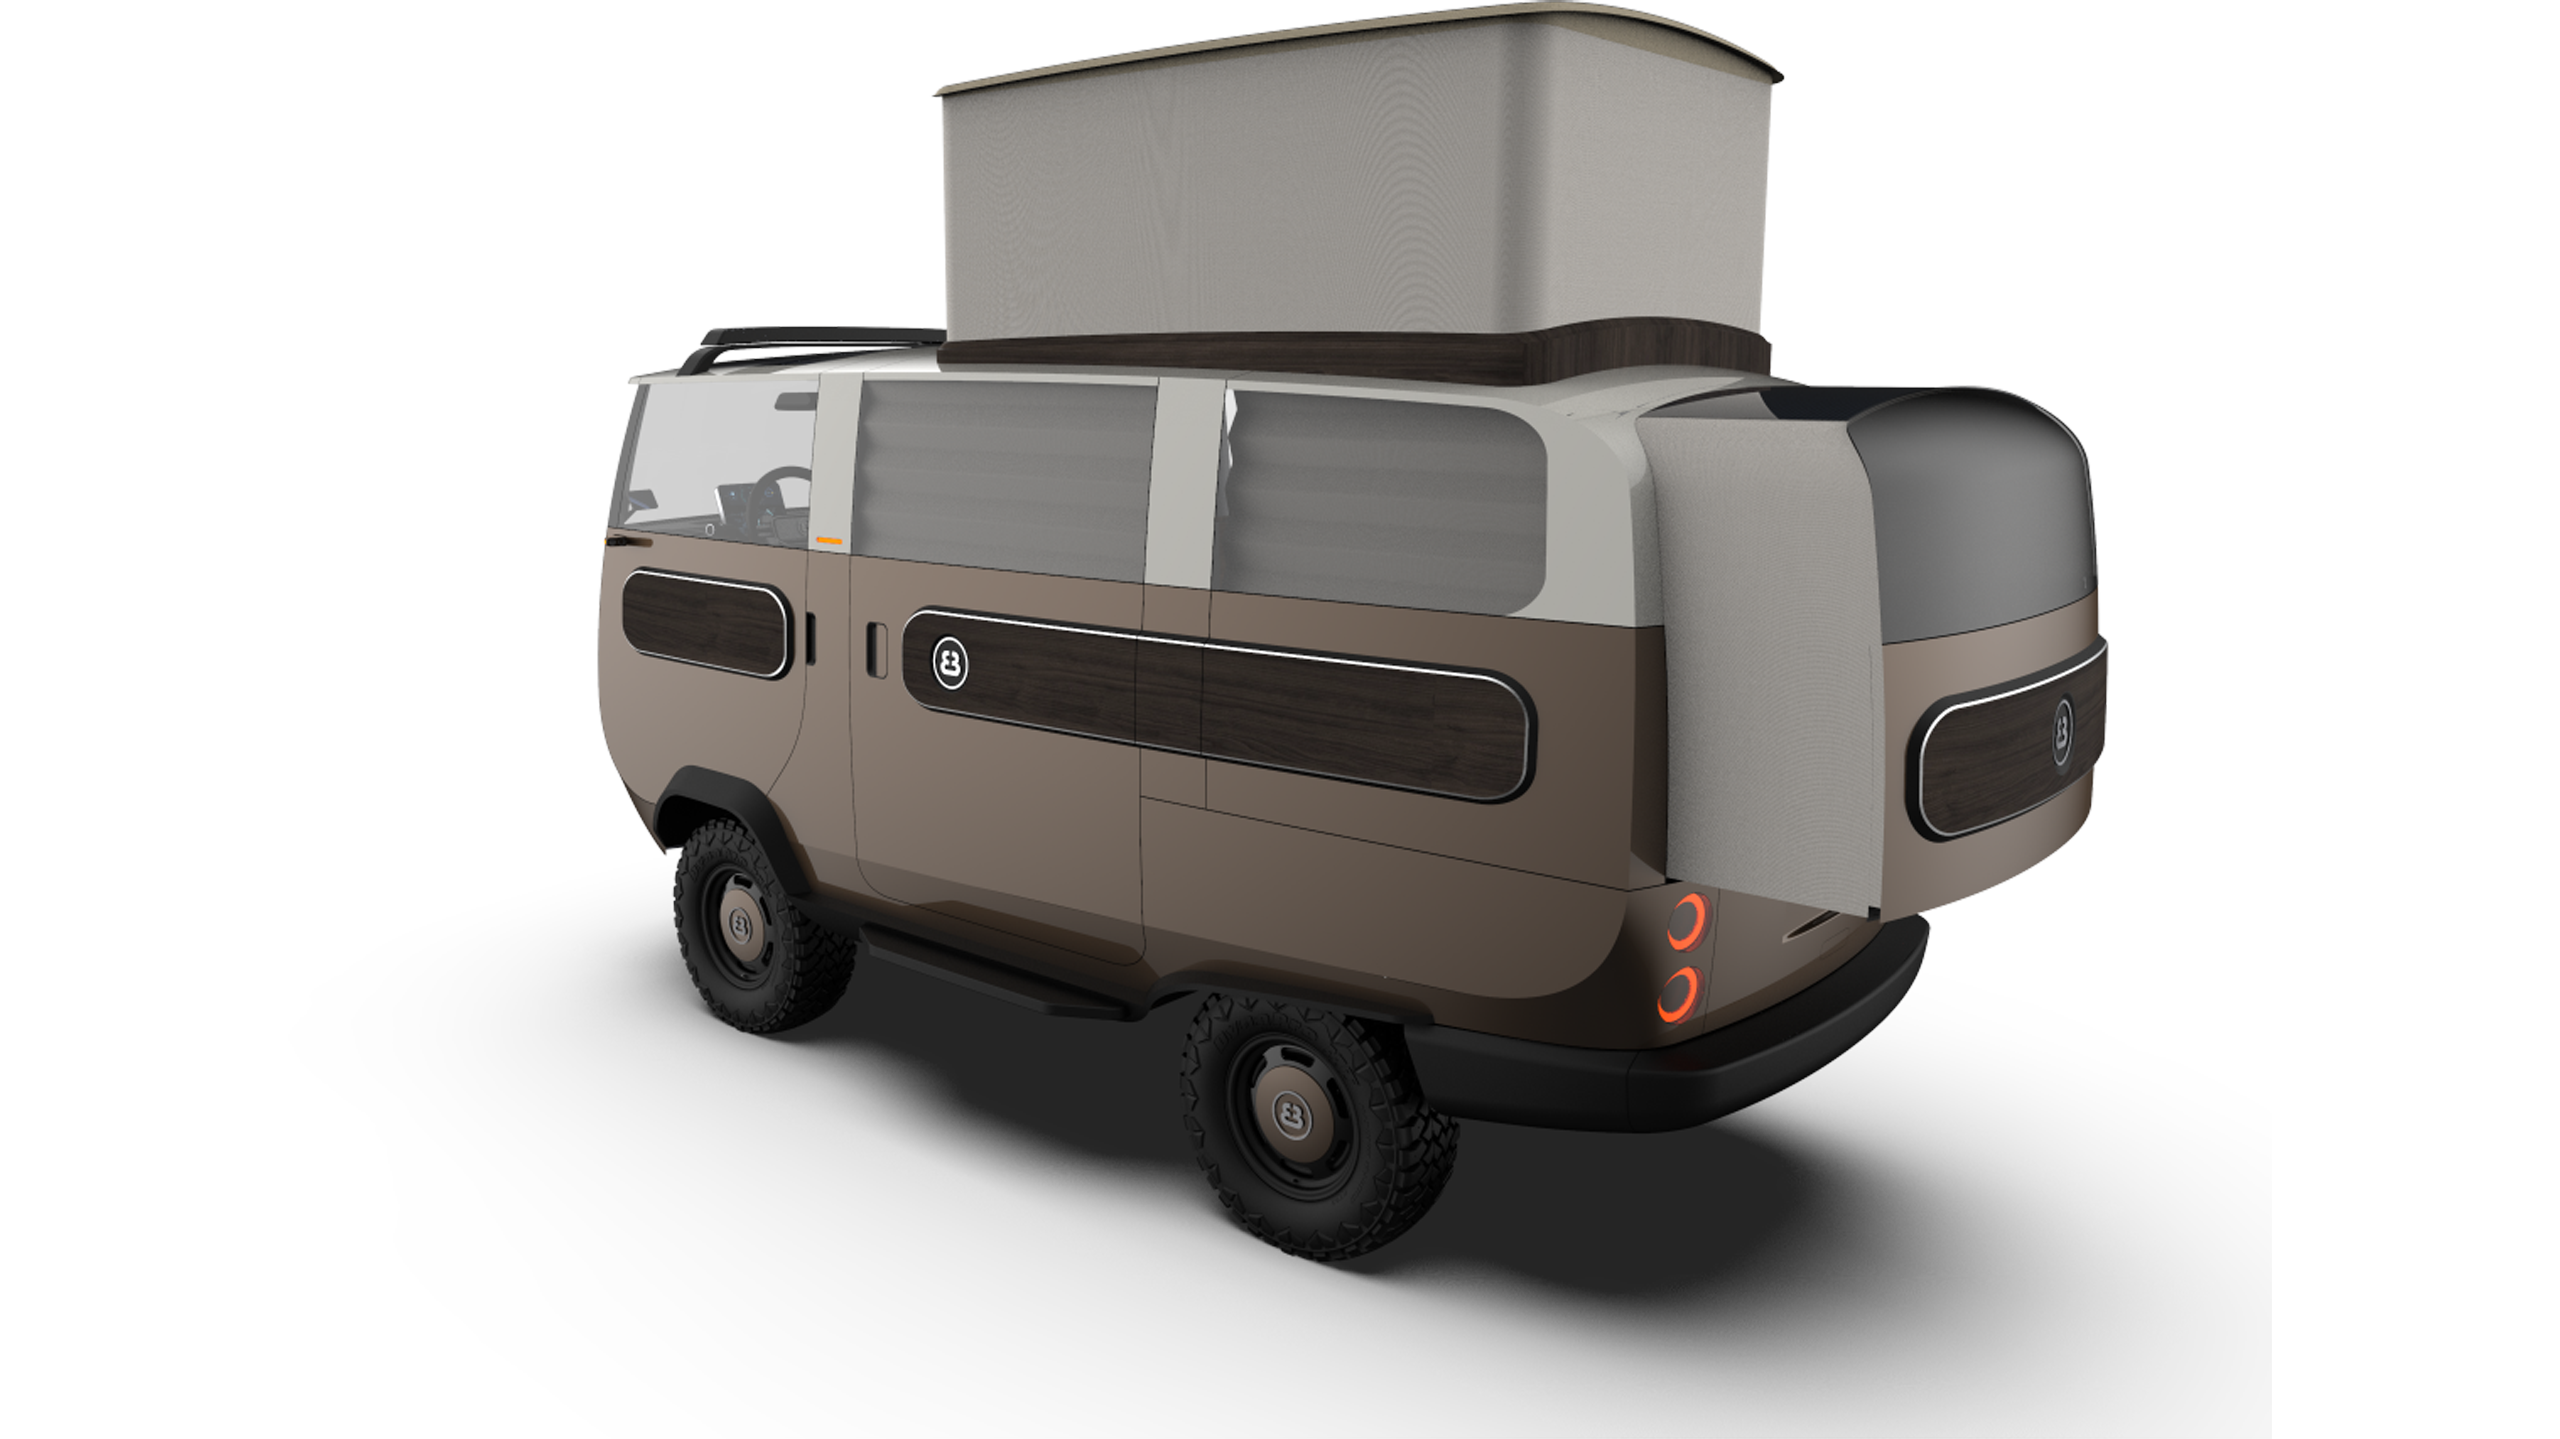 Here's a new 32,000 electric camper and we are highly skeptical Electrek